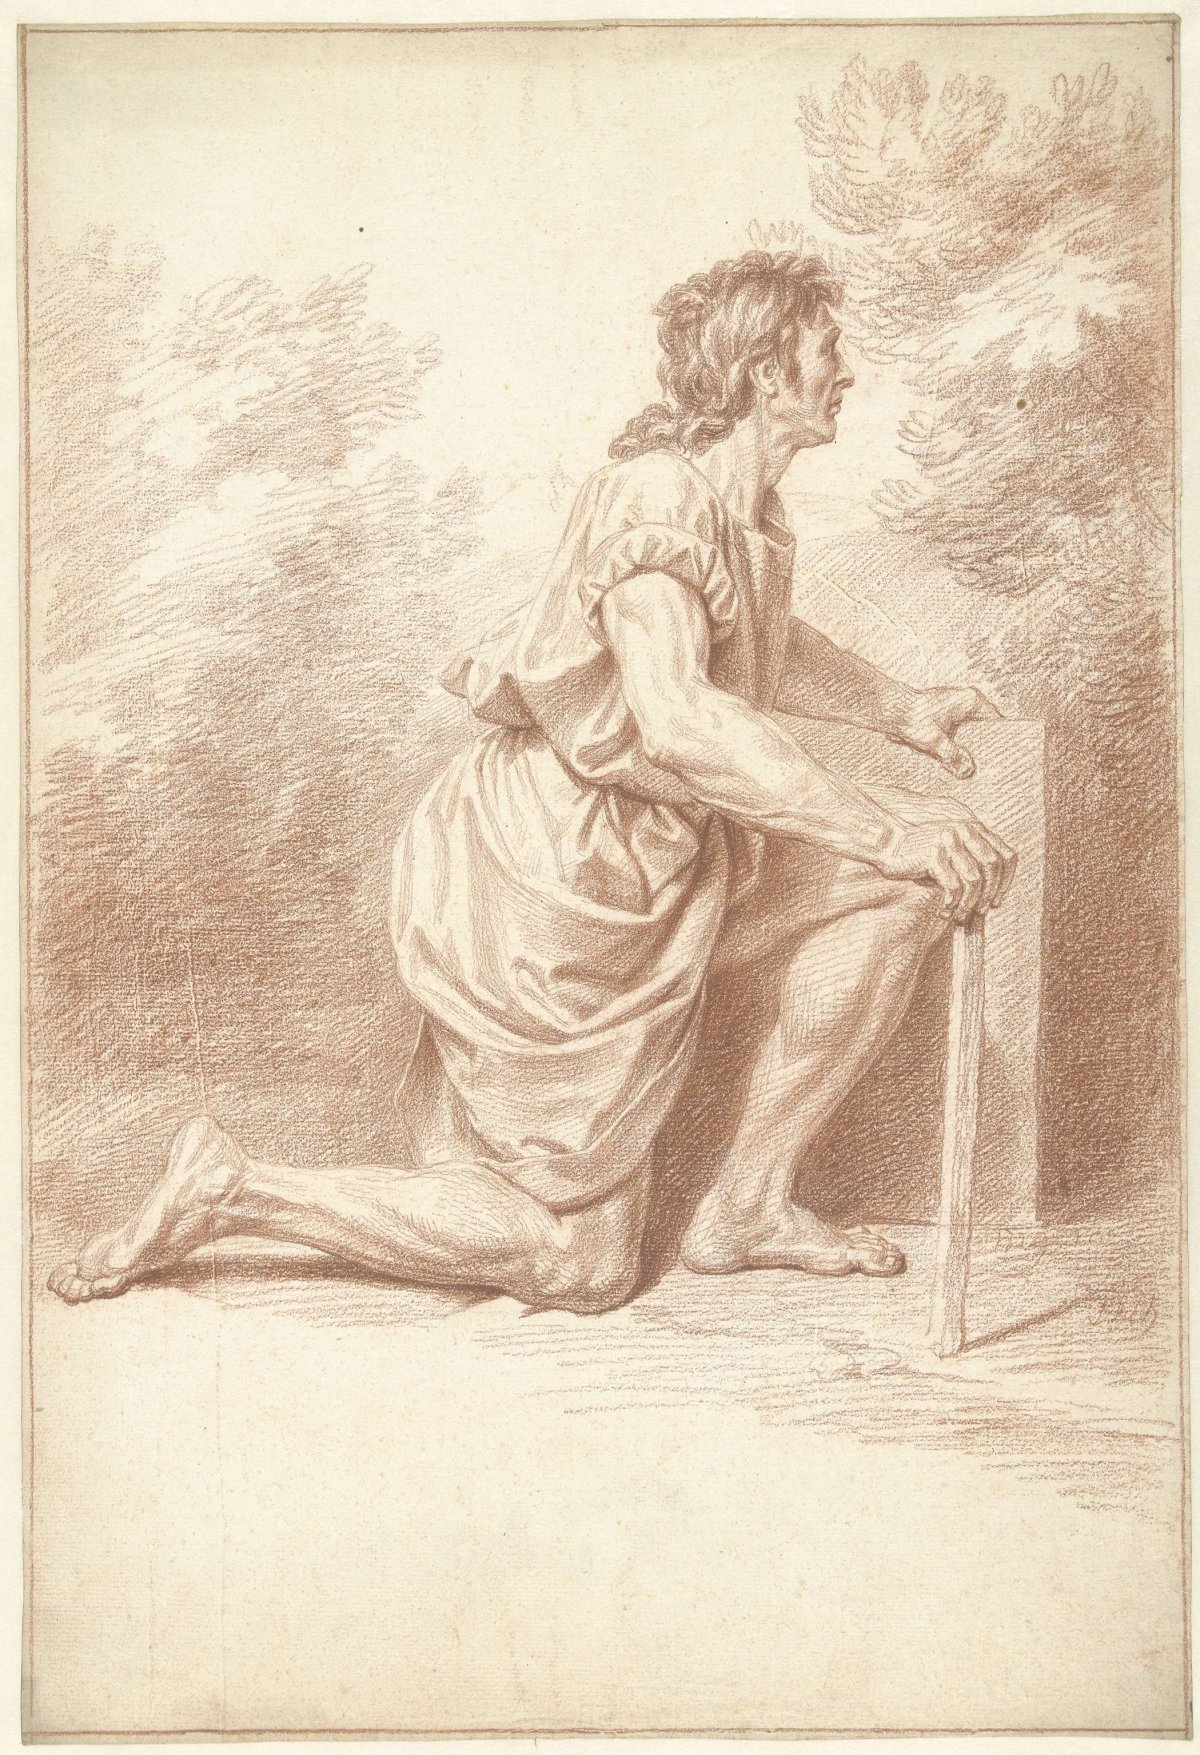 Kneeling man, to the right, Louis Fabritius Dubourg, 1719